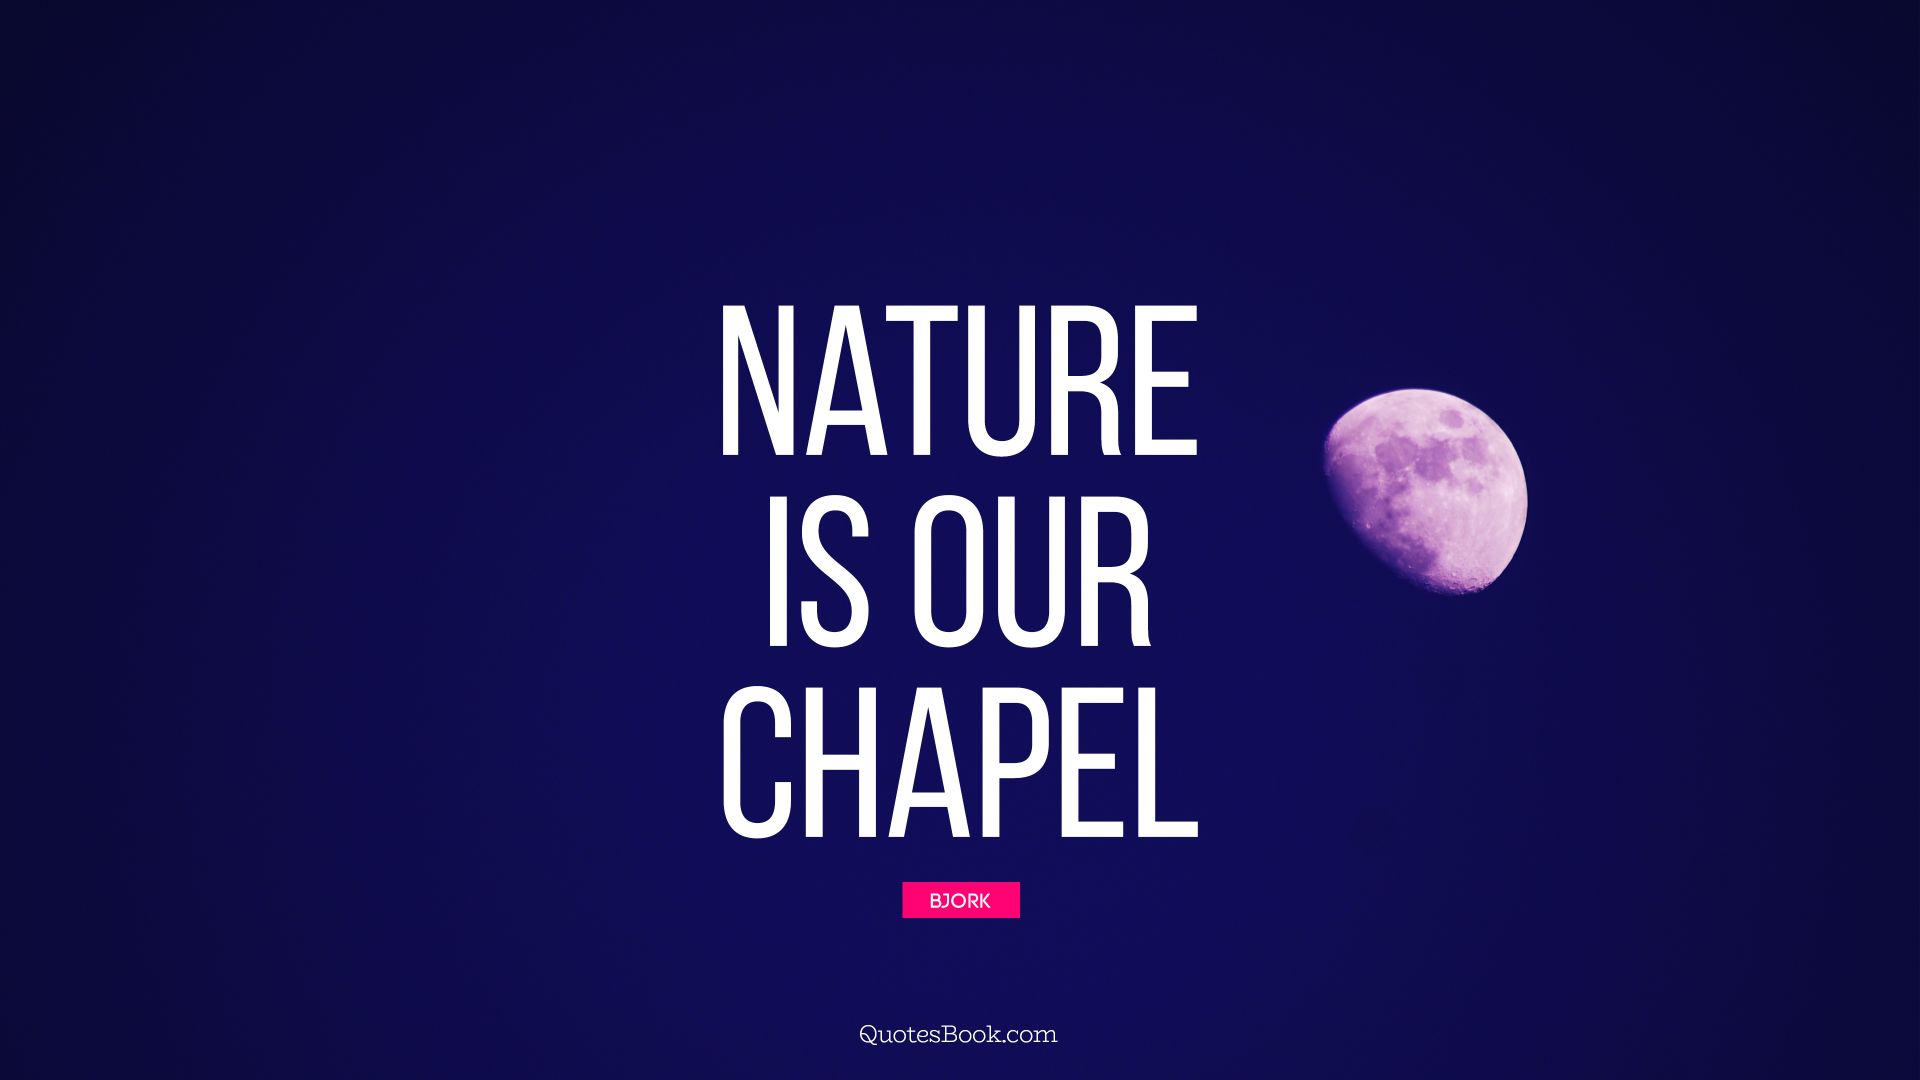 Nature is our chapel. - Quote by Bjork